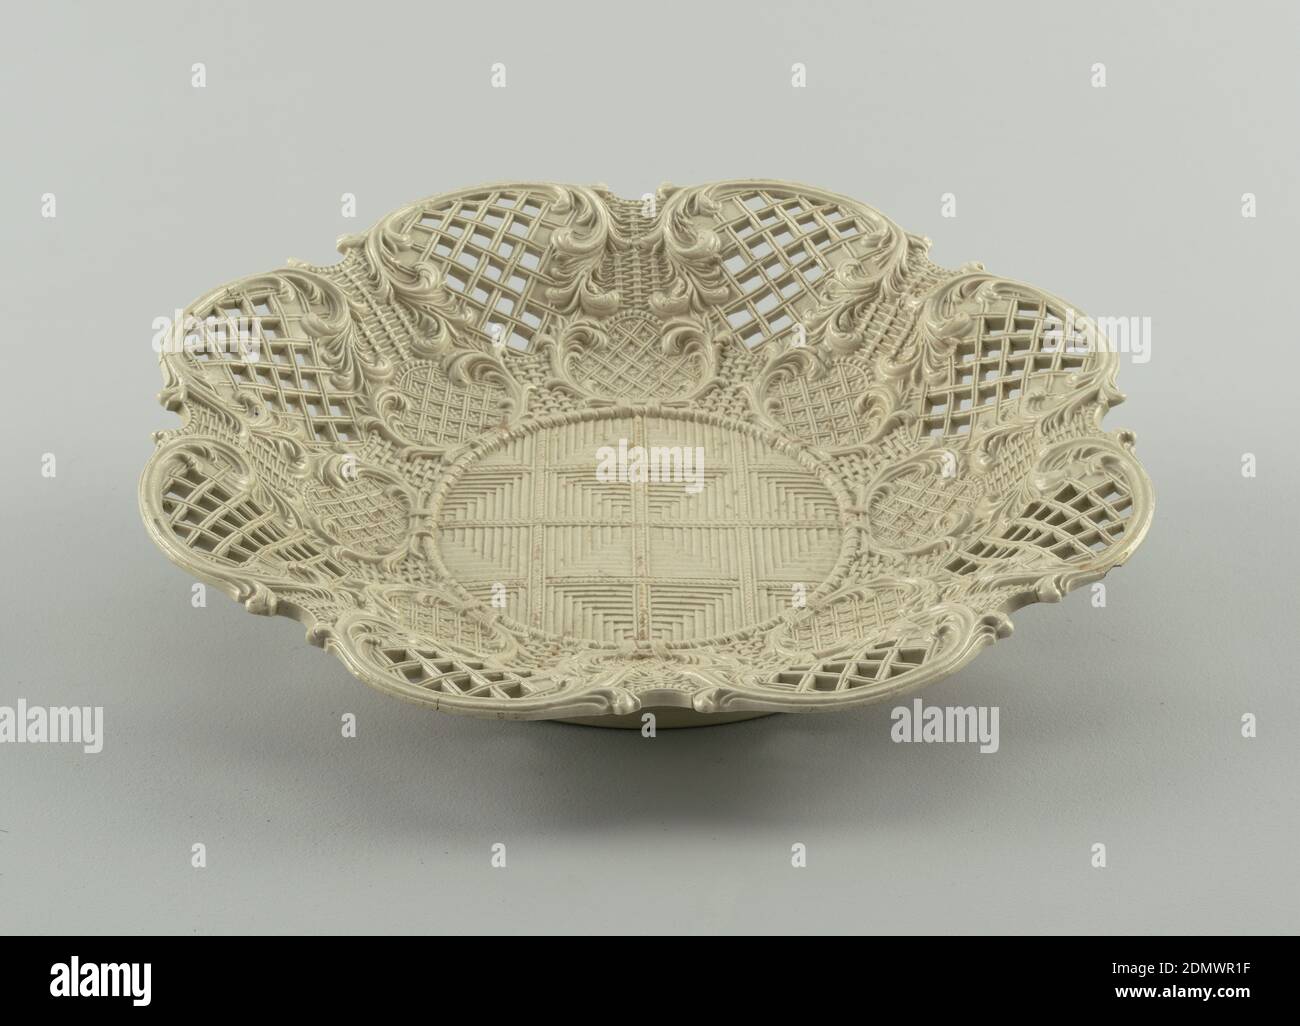 Plate, Molded and pierced salt-glazed stoneware, Round, low basket, molded to resemble weaving. Scrollwork and piercing along sides., Staffordshire, England, ca. 1760, ceramics, Decorative Arts, Plate Stock Photo